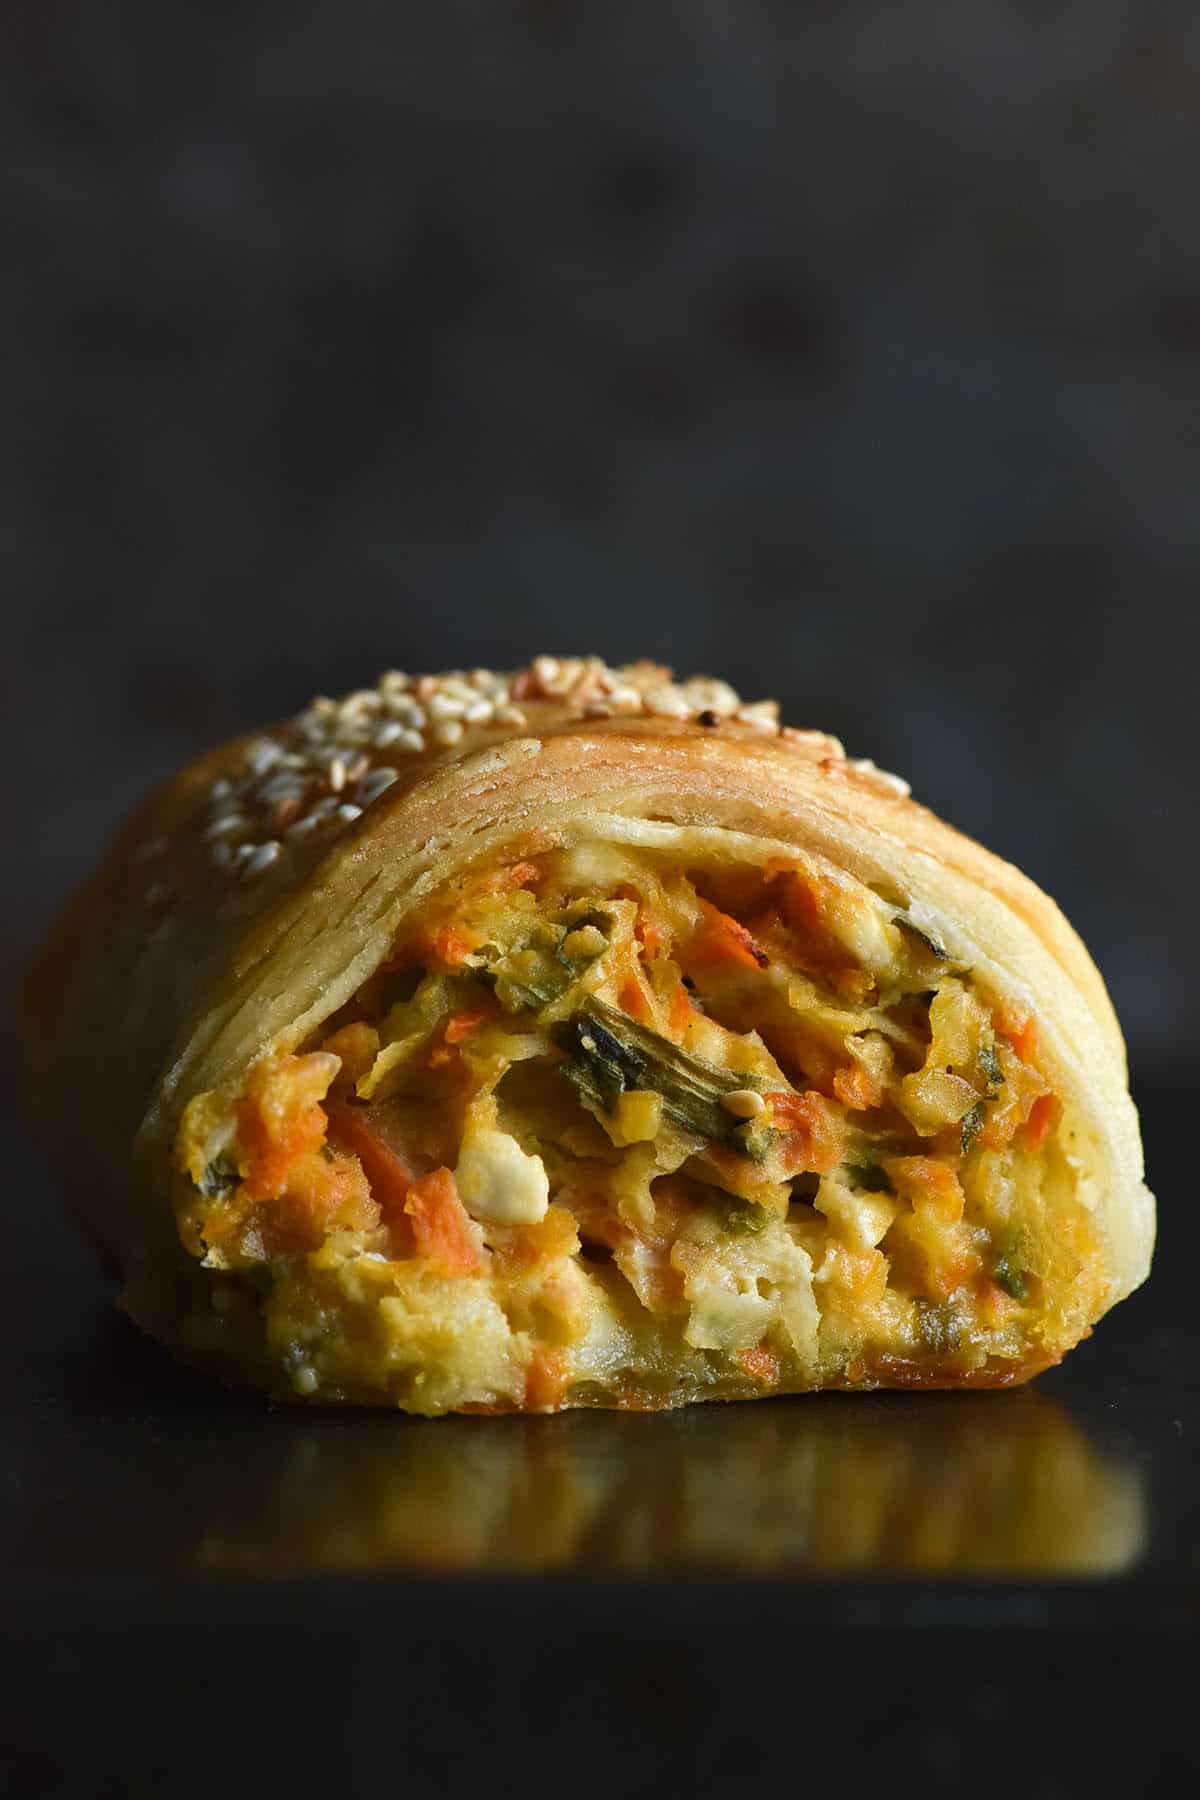 A side on close up macro image of a gluten free vegetable, feta and chickpea sausage roll. The roll sits atop a dark grey background against a dark backdrop. The side on angle reveals the vegetable and melty cheese filling inside, as well as the flaky, golden pastry encompassing it. The roll is topped with toasted sesame seeds that are visible atop the roll